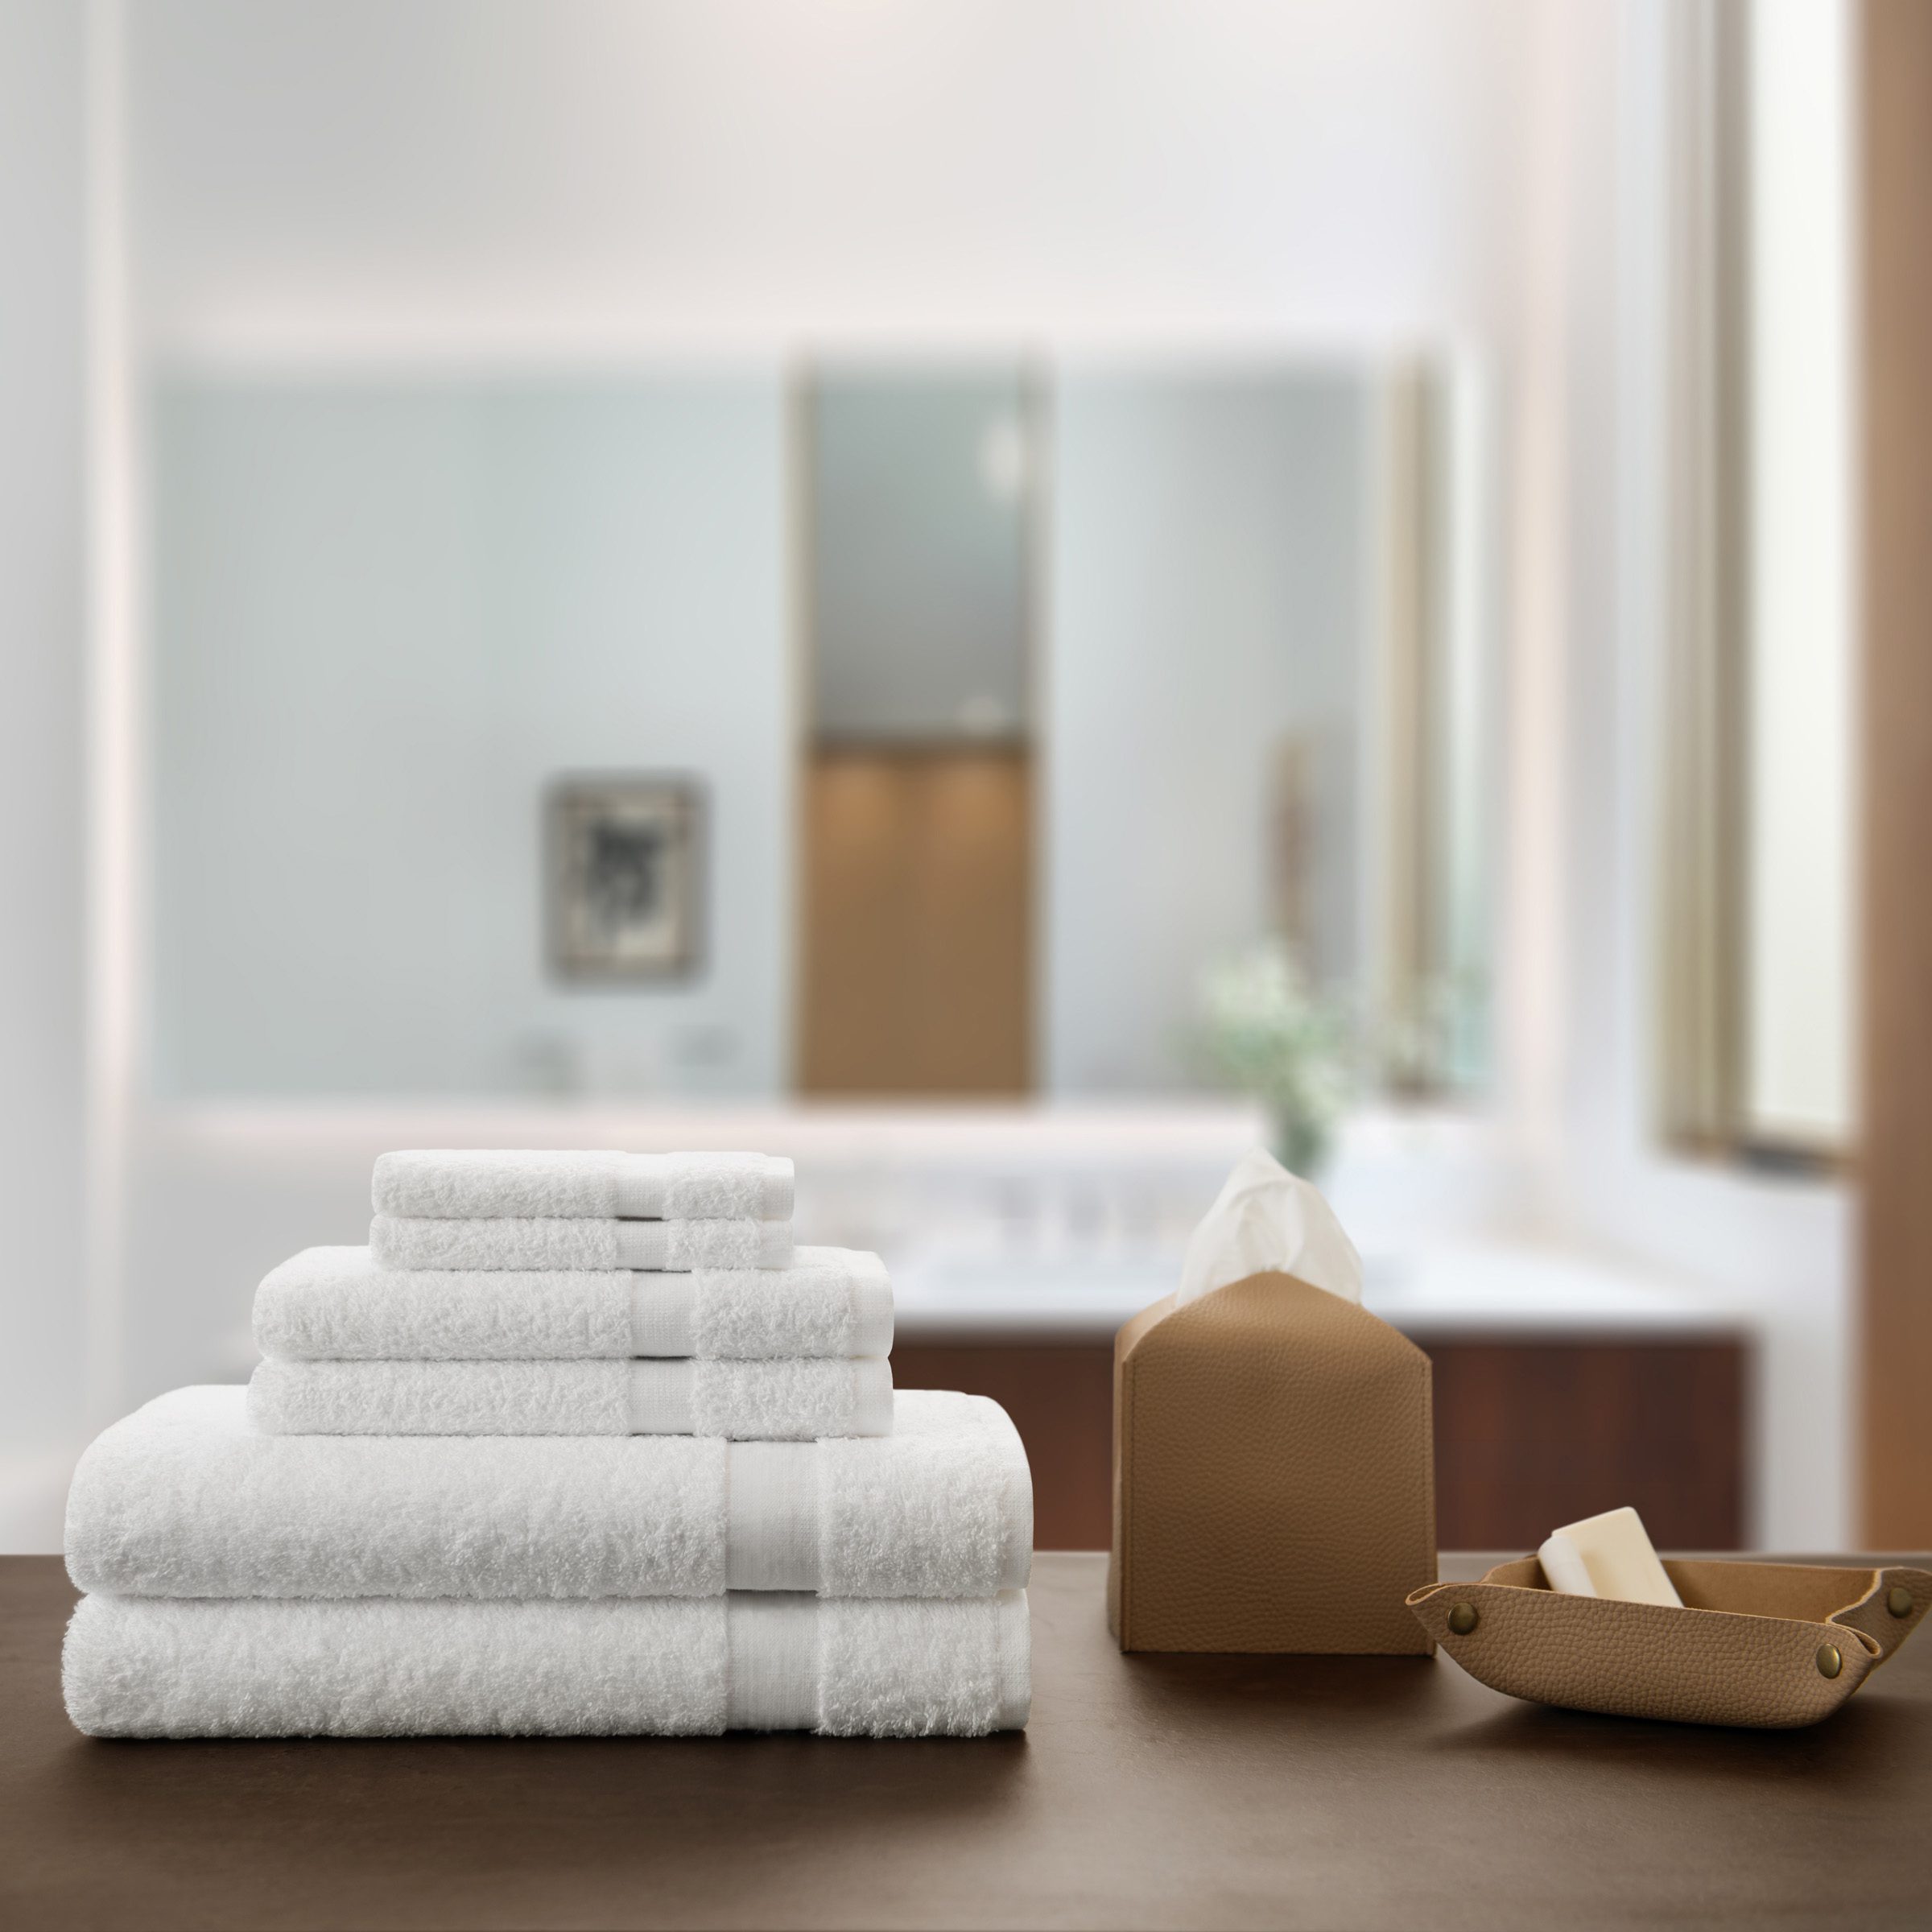 Characteristics of the Best Wholesale Towels